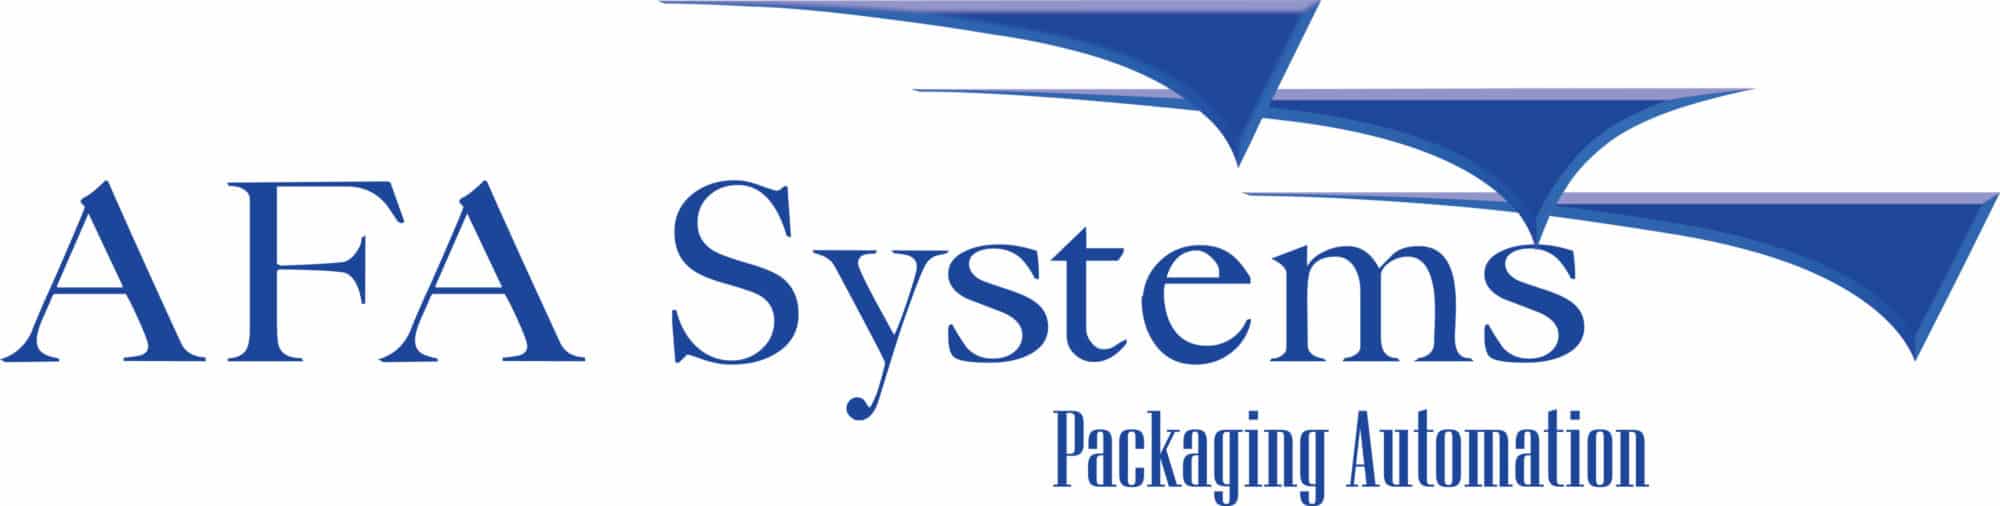 AFA Systems Packaging Automation logo